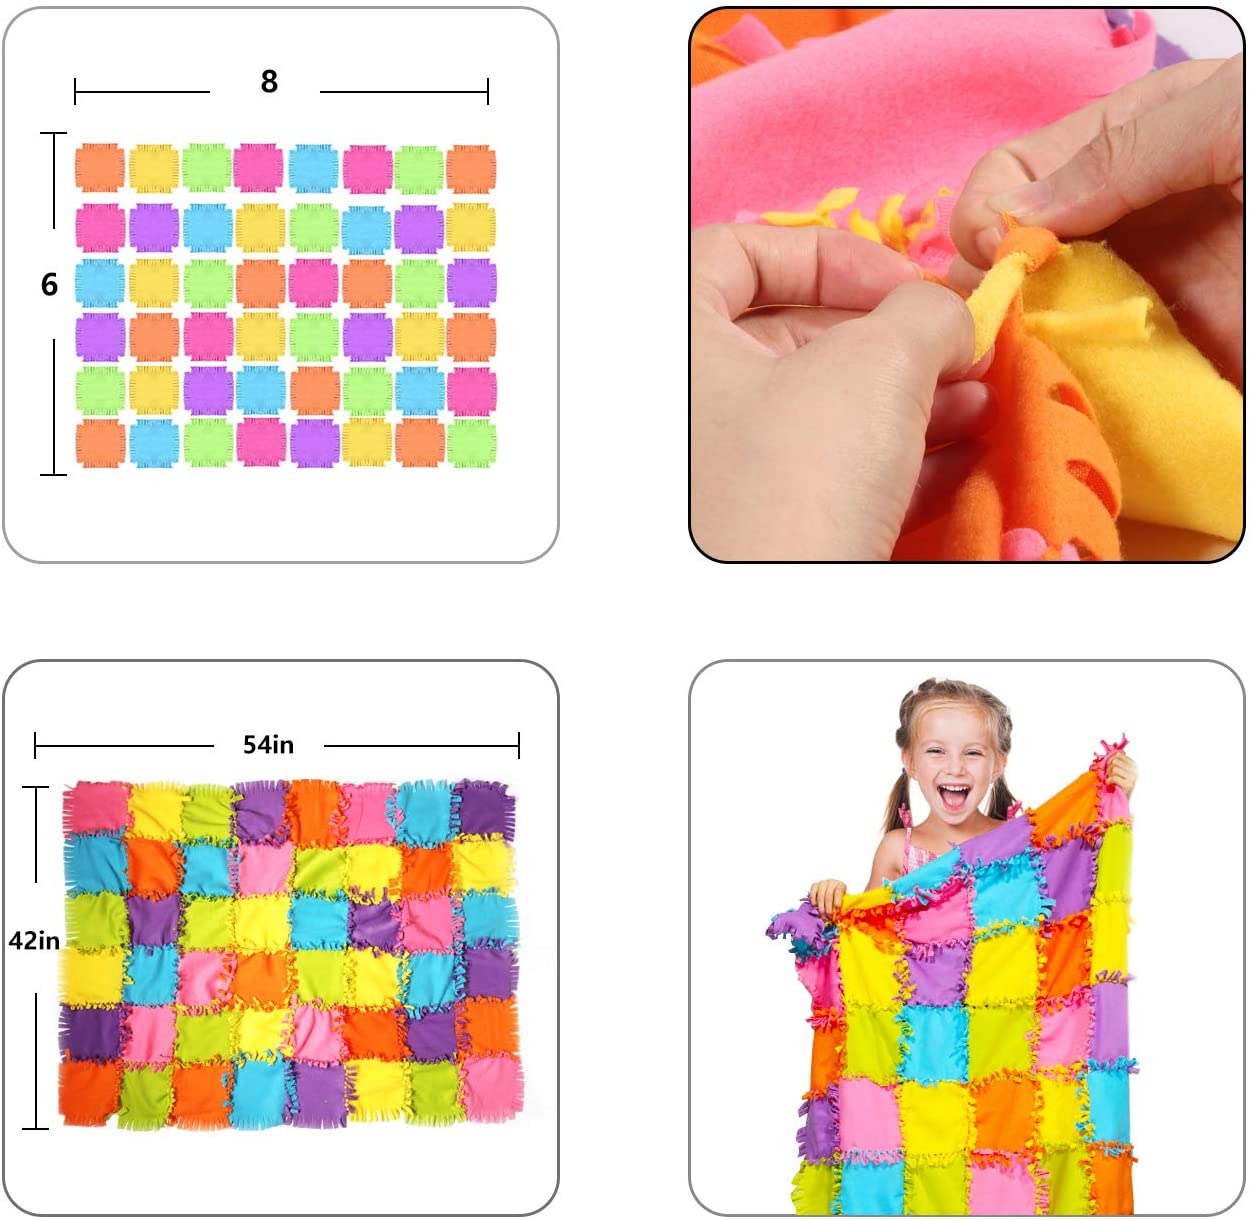 Koltose by Mash - Knot a Quilt Kit, No-Sew DIY Fleece Blanket, 54” x 42”  Boys & Girls Ages 4-16 